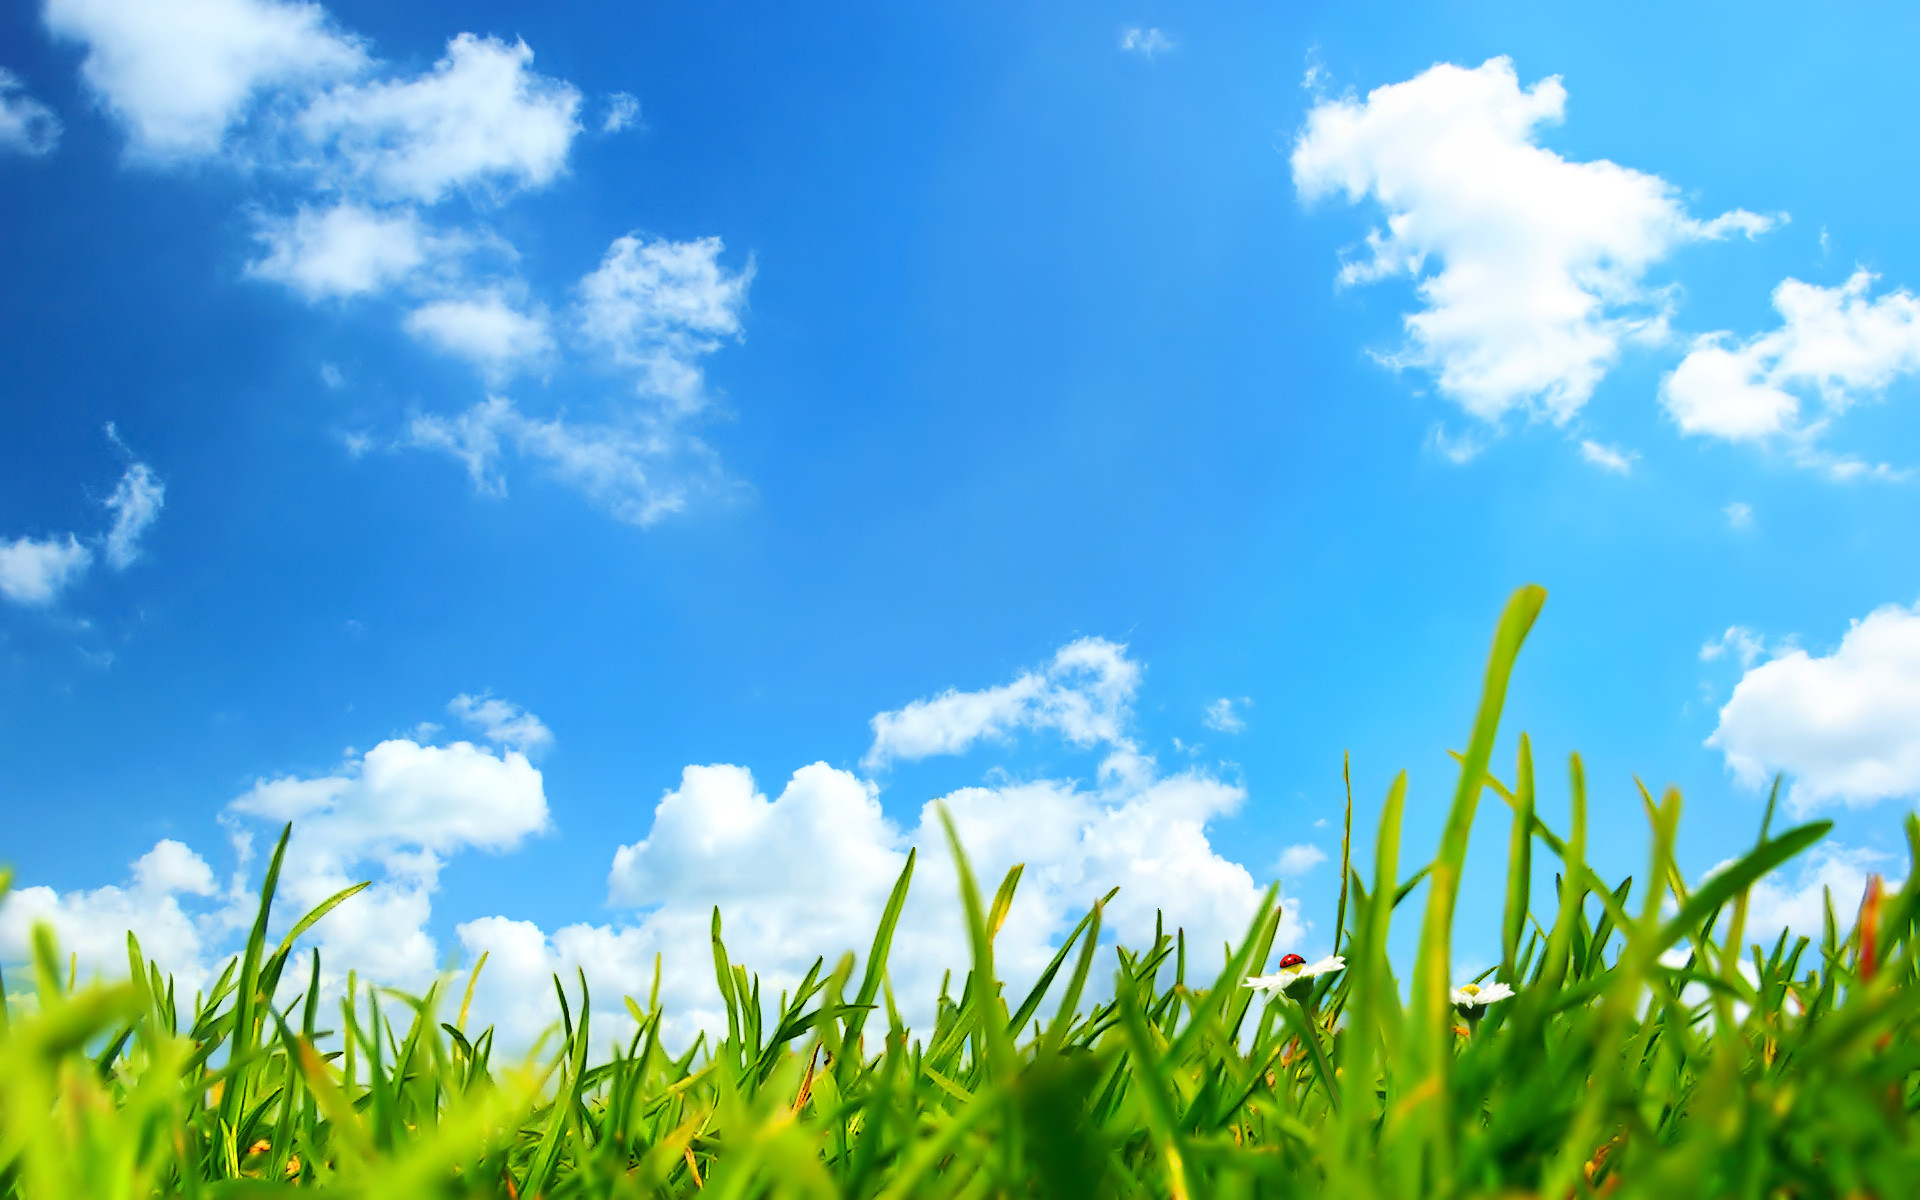 Grass And Sky Wallpaper (71+ images)